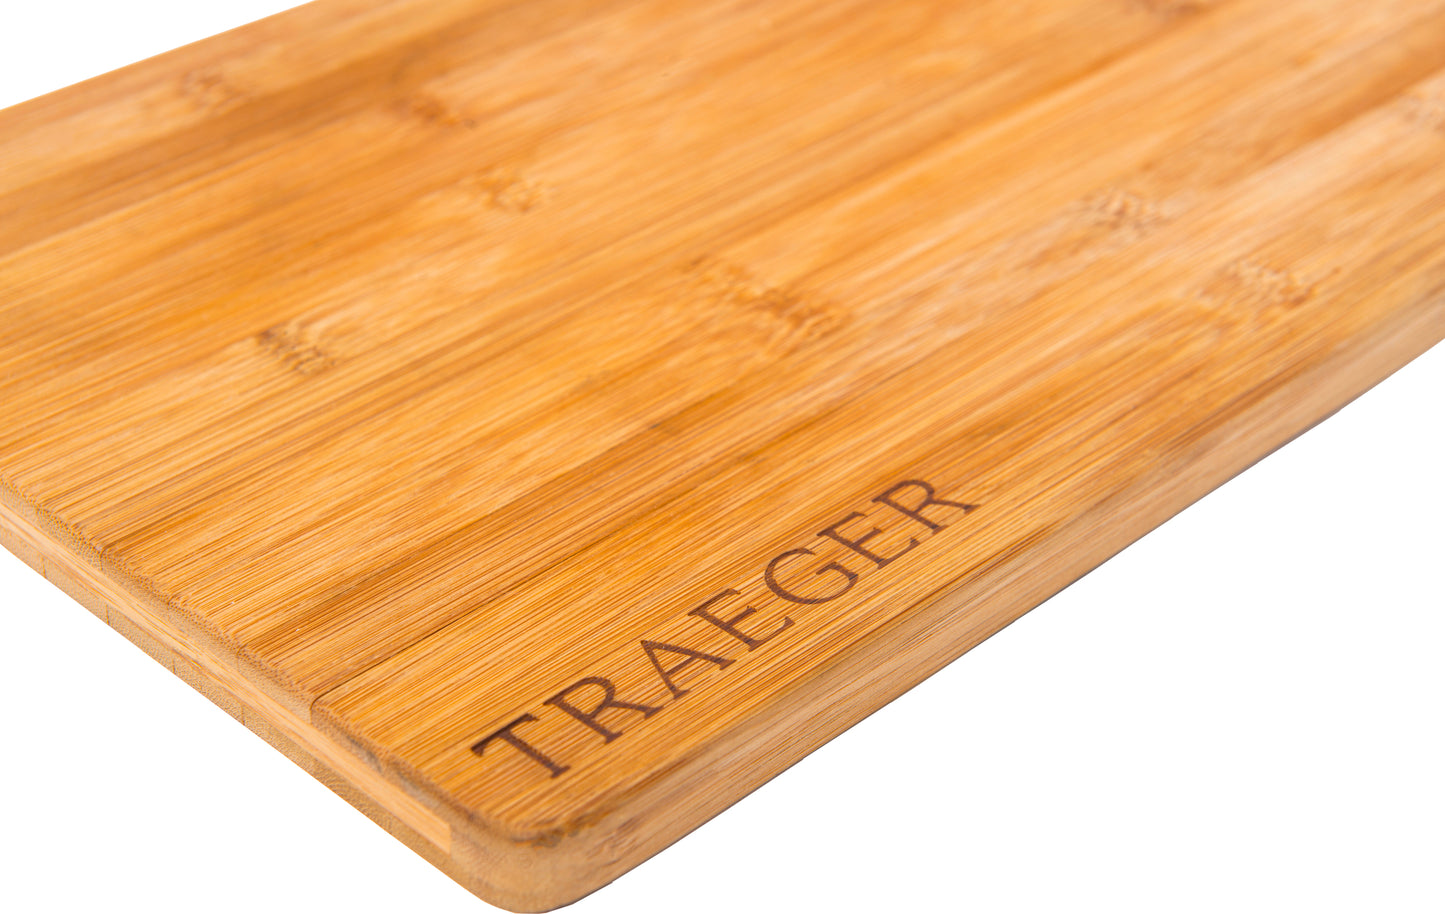 Traeger cutting board - Bamboo - Magnetic